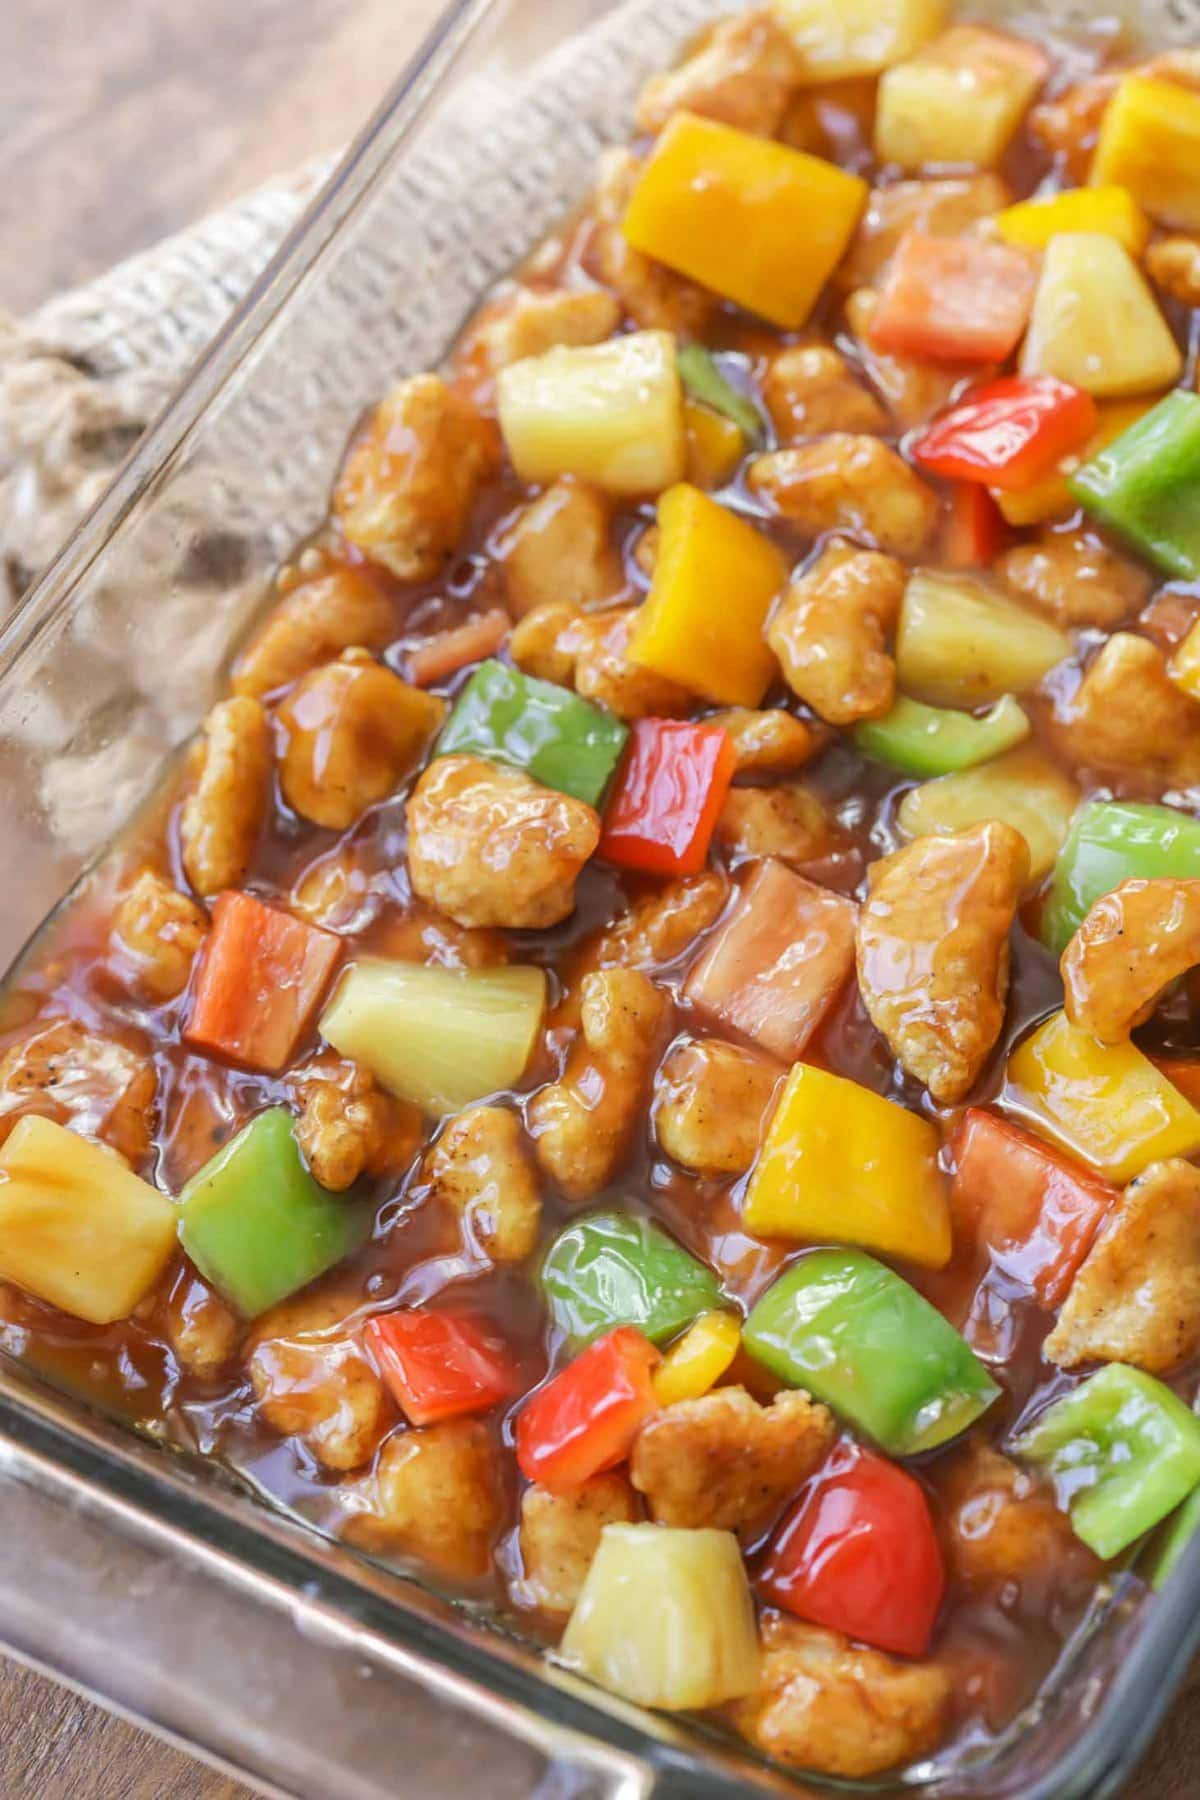 Baked Sweet and Sour Chicken recipe in casserole dish